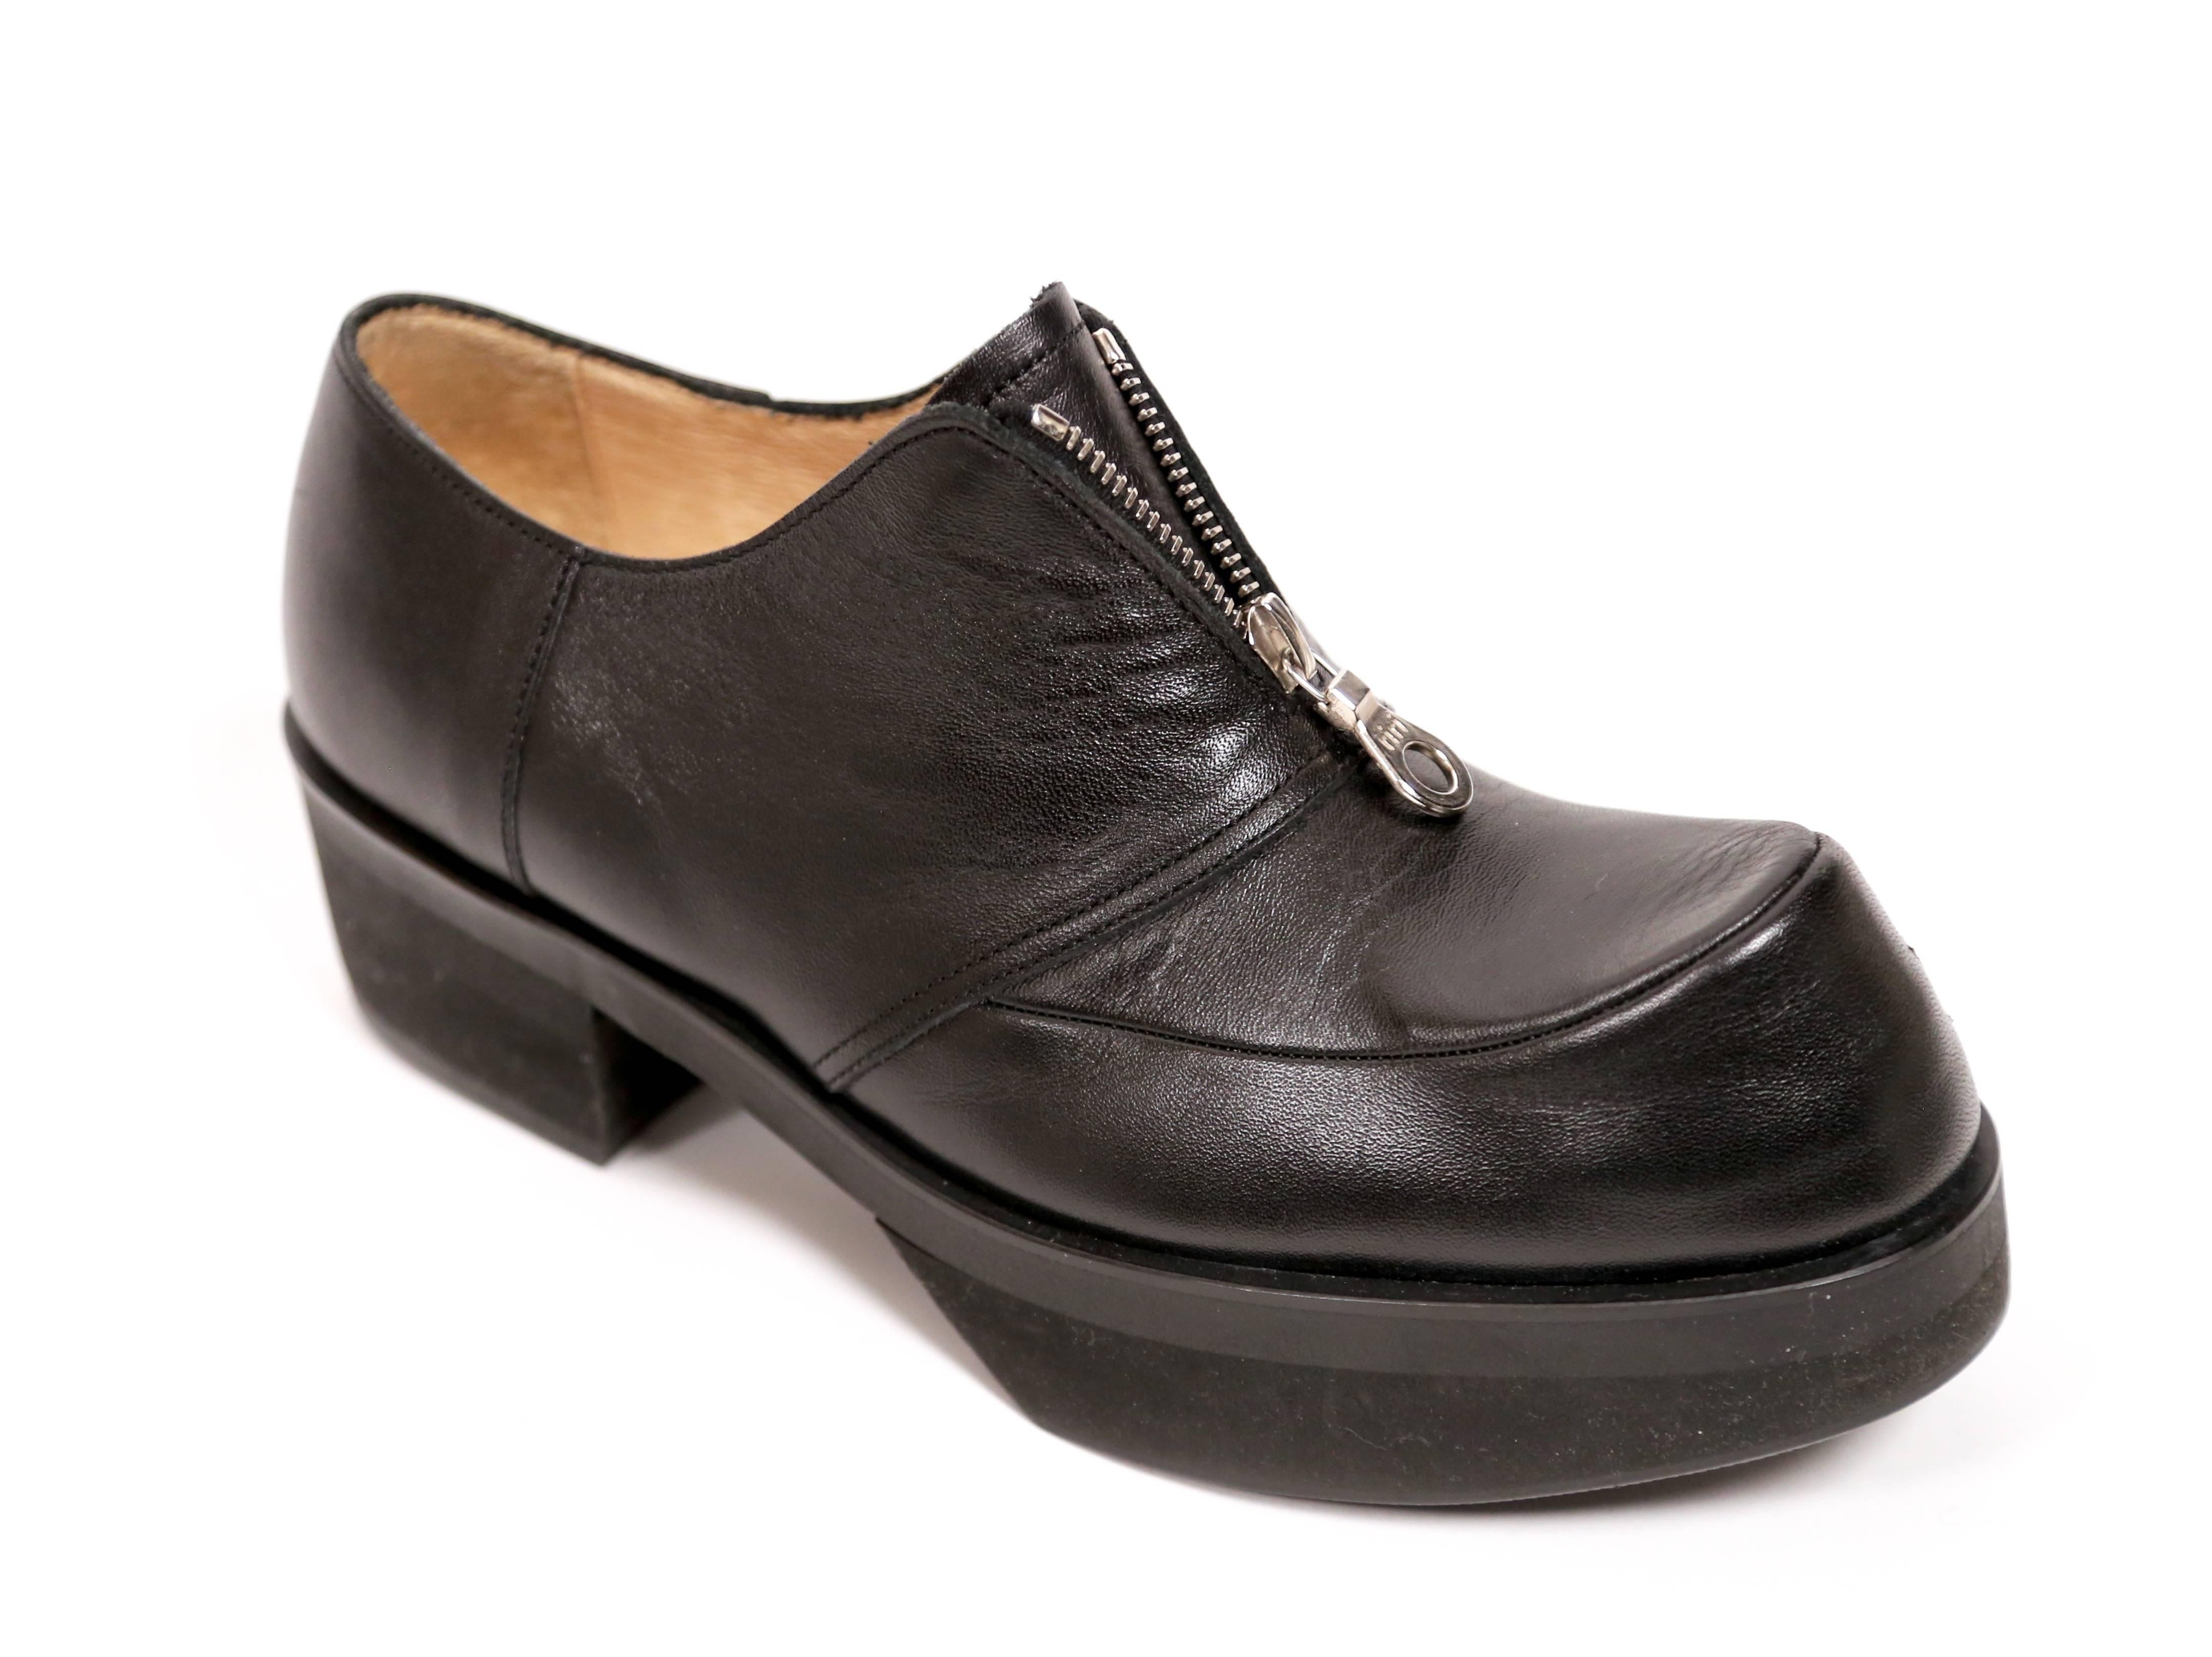 Black leather zip up oxfords with platform soles designed by Yohji Yamamoto dating to the 1990's.  Shoes can be worn with the zippers open or closed. Labeled a size 'L'. Fits approximately a US 8.5. Insoles measure 24.5cm long by 8.5cm wide. Heels